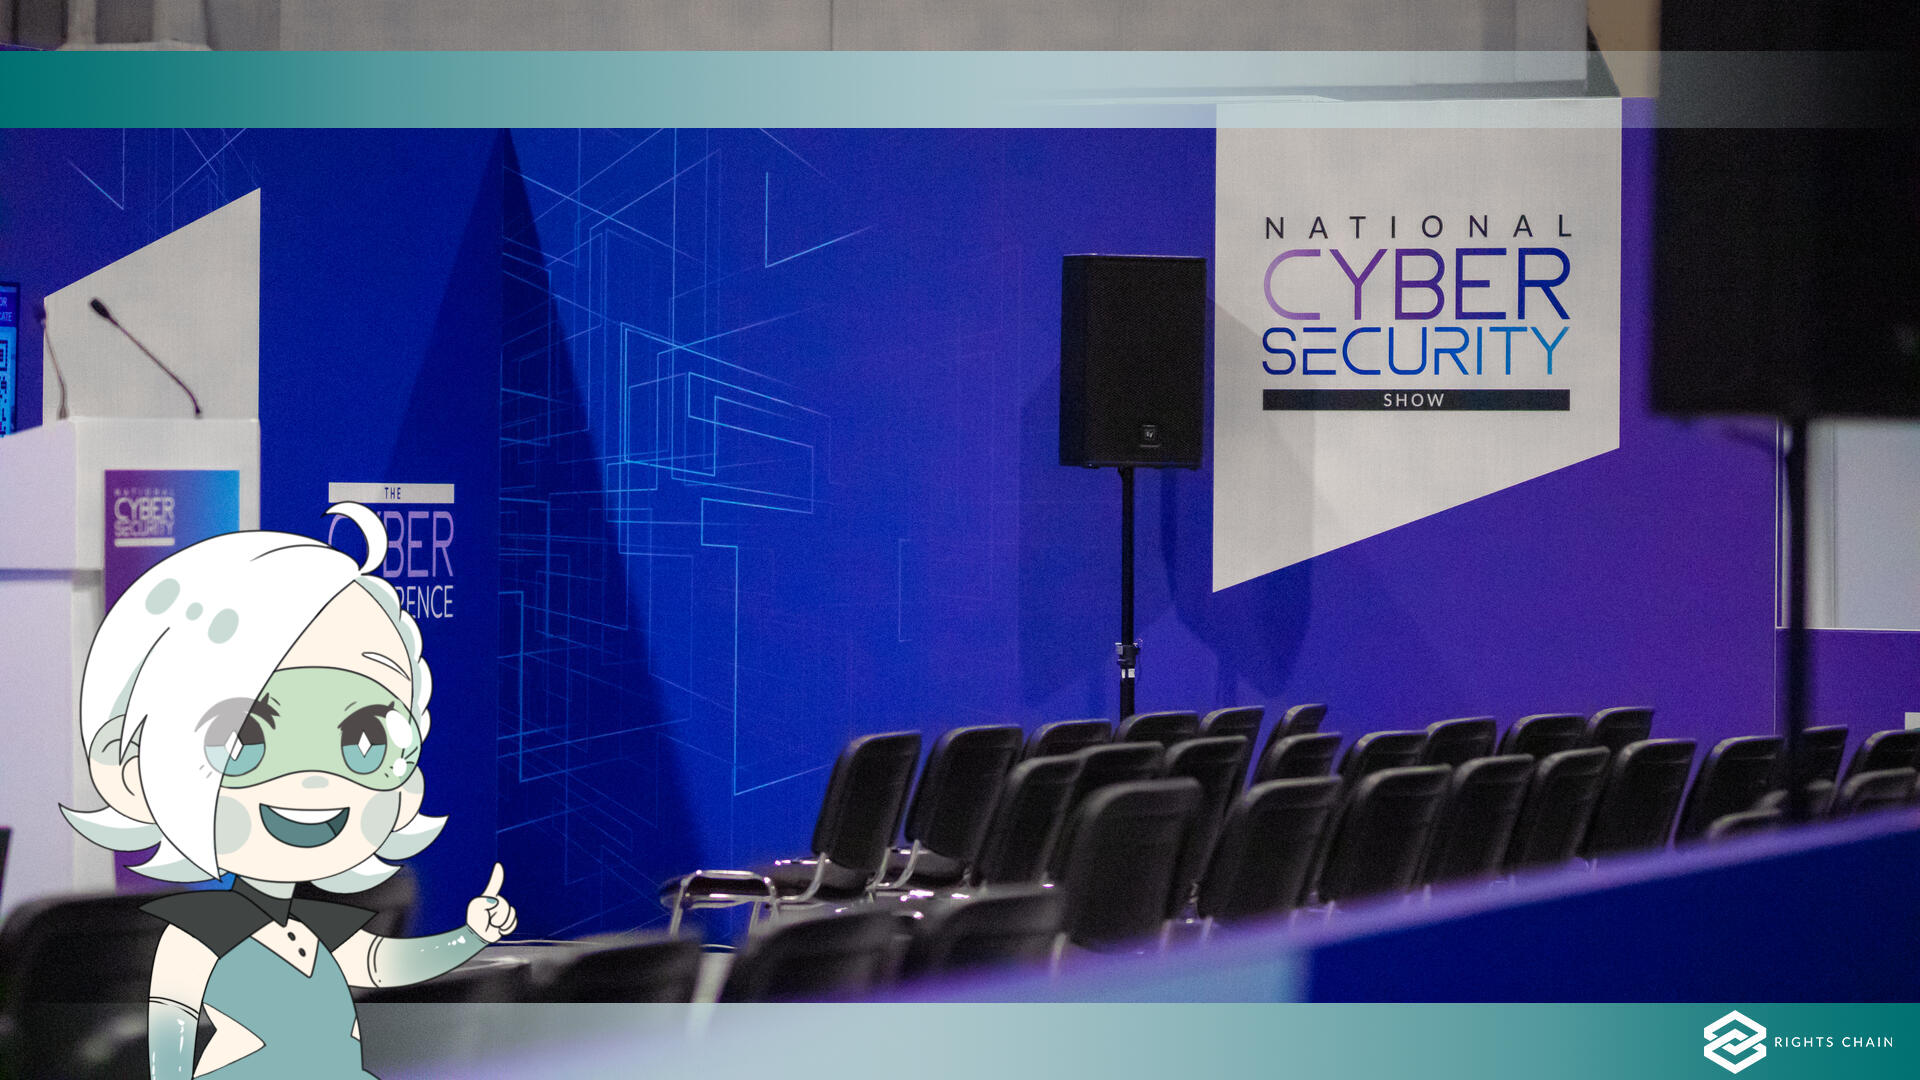 Birmingham National Cyber Security Show - Our Experience.